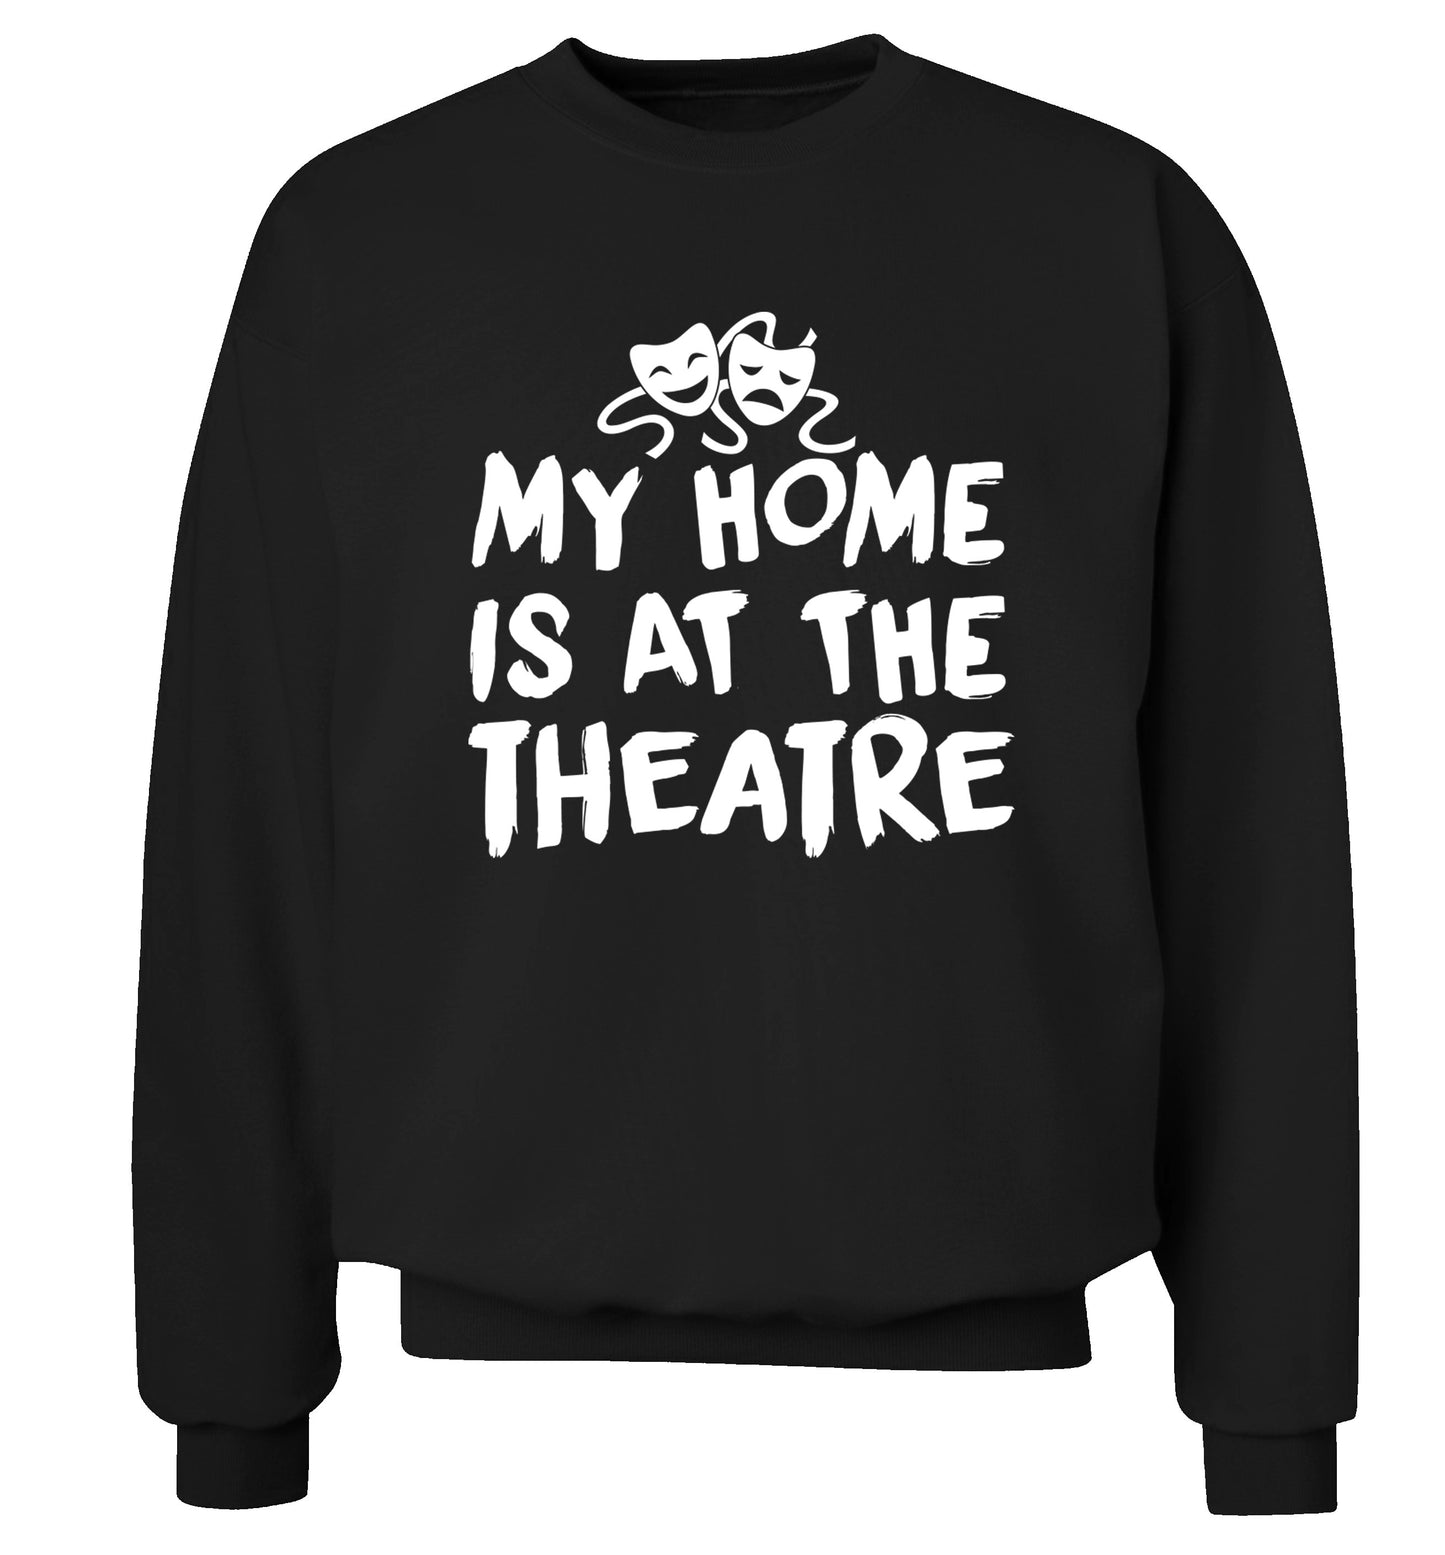 My home is at the theatre Adult's unisex black Sweater 2XL